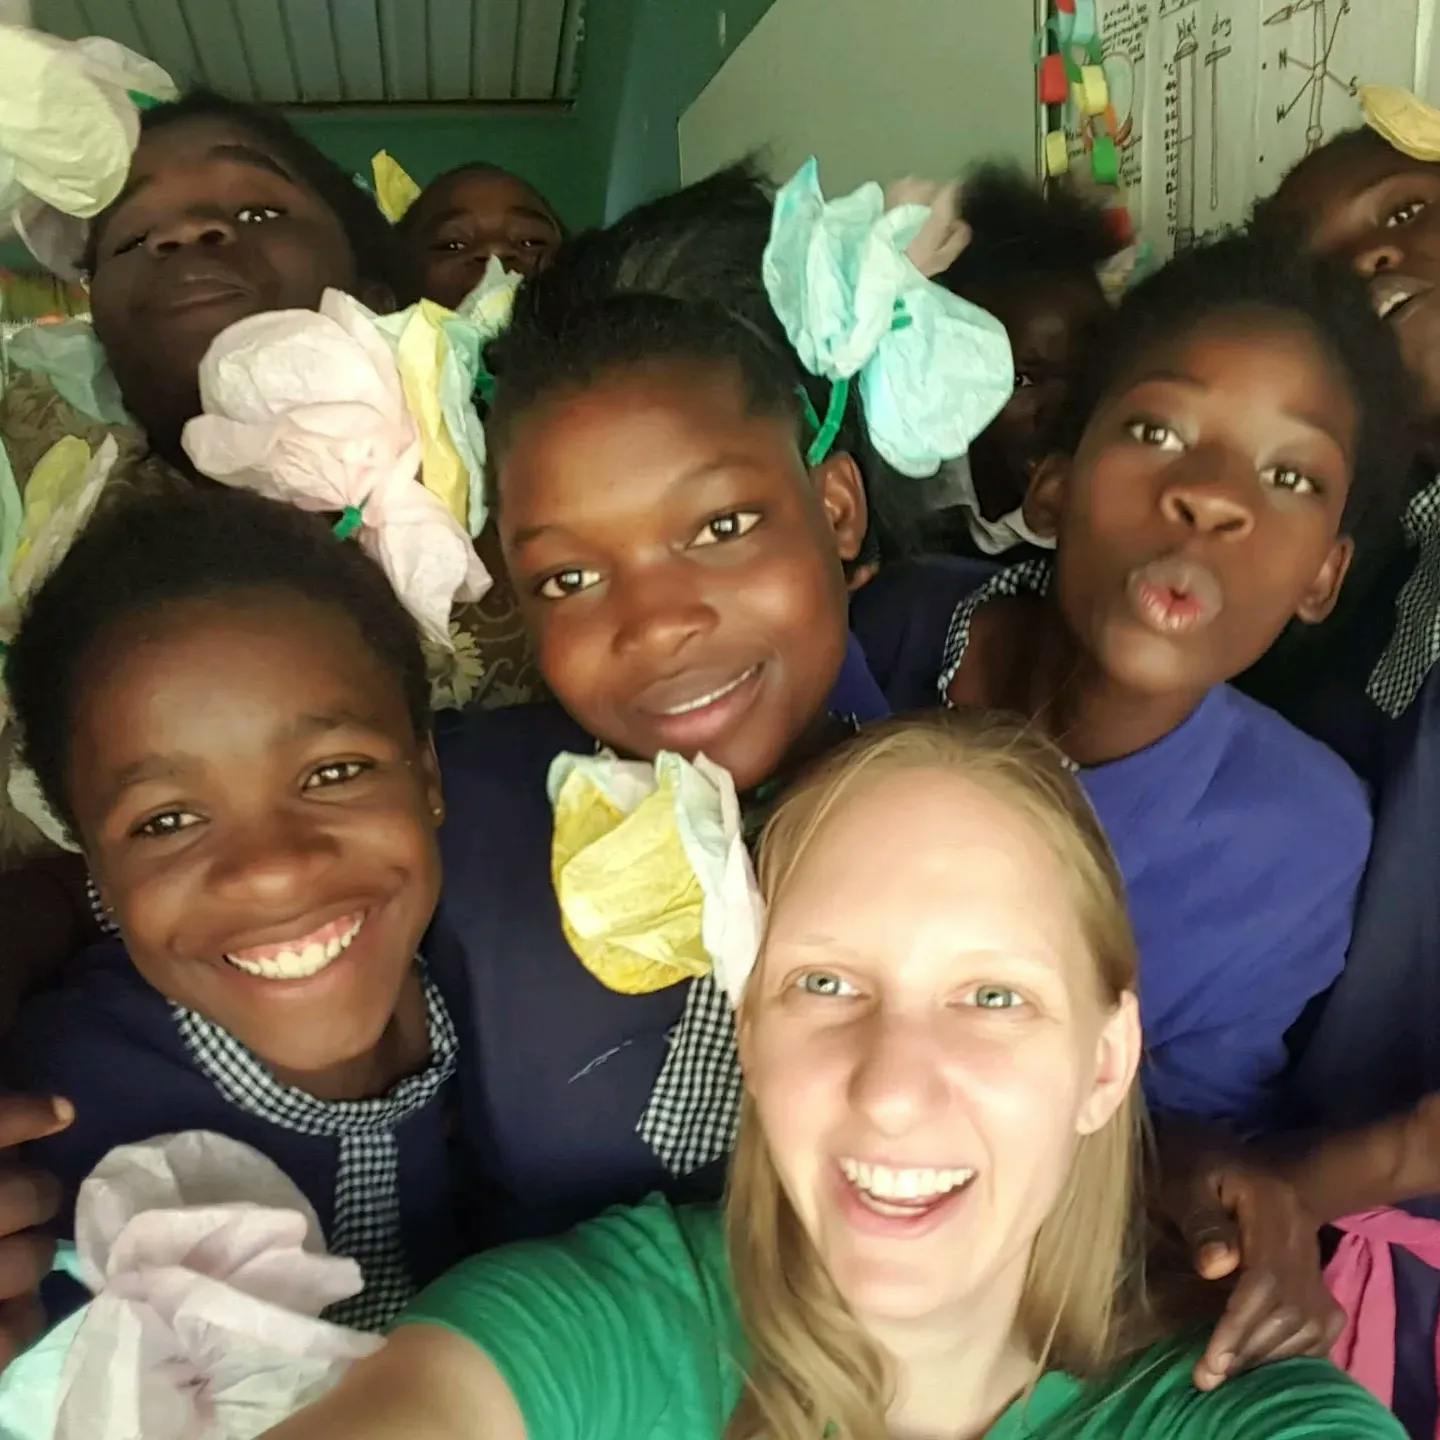 Zambia was so wonderful I had to go again! On my second trip I stayed for 6 weeks and developed a girls empowerment group based on an organization I volunteer with at home. This is us enjoying our end of session party. 